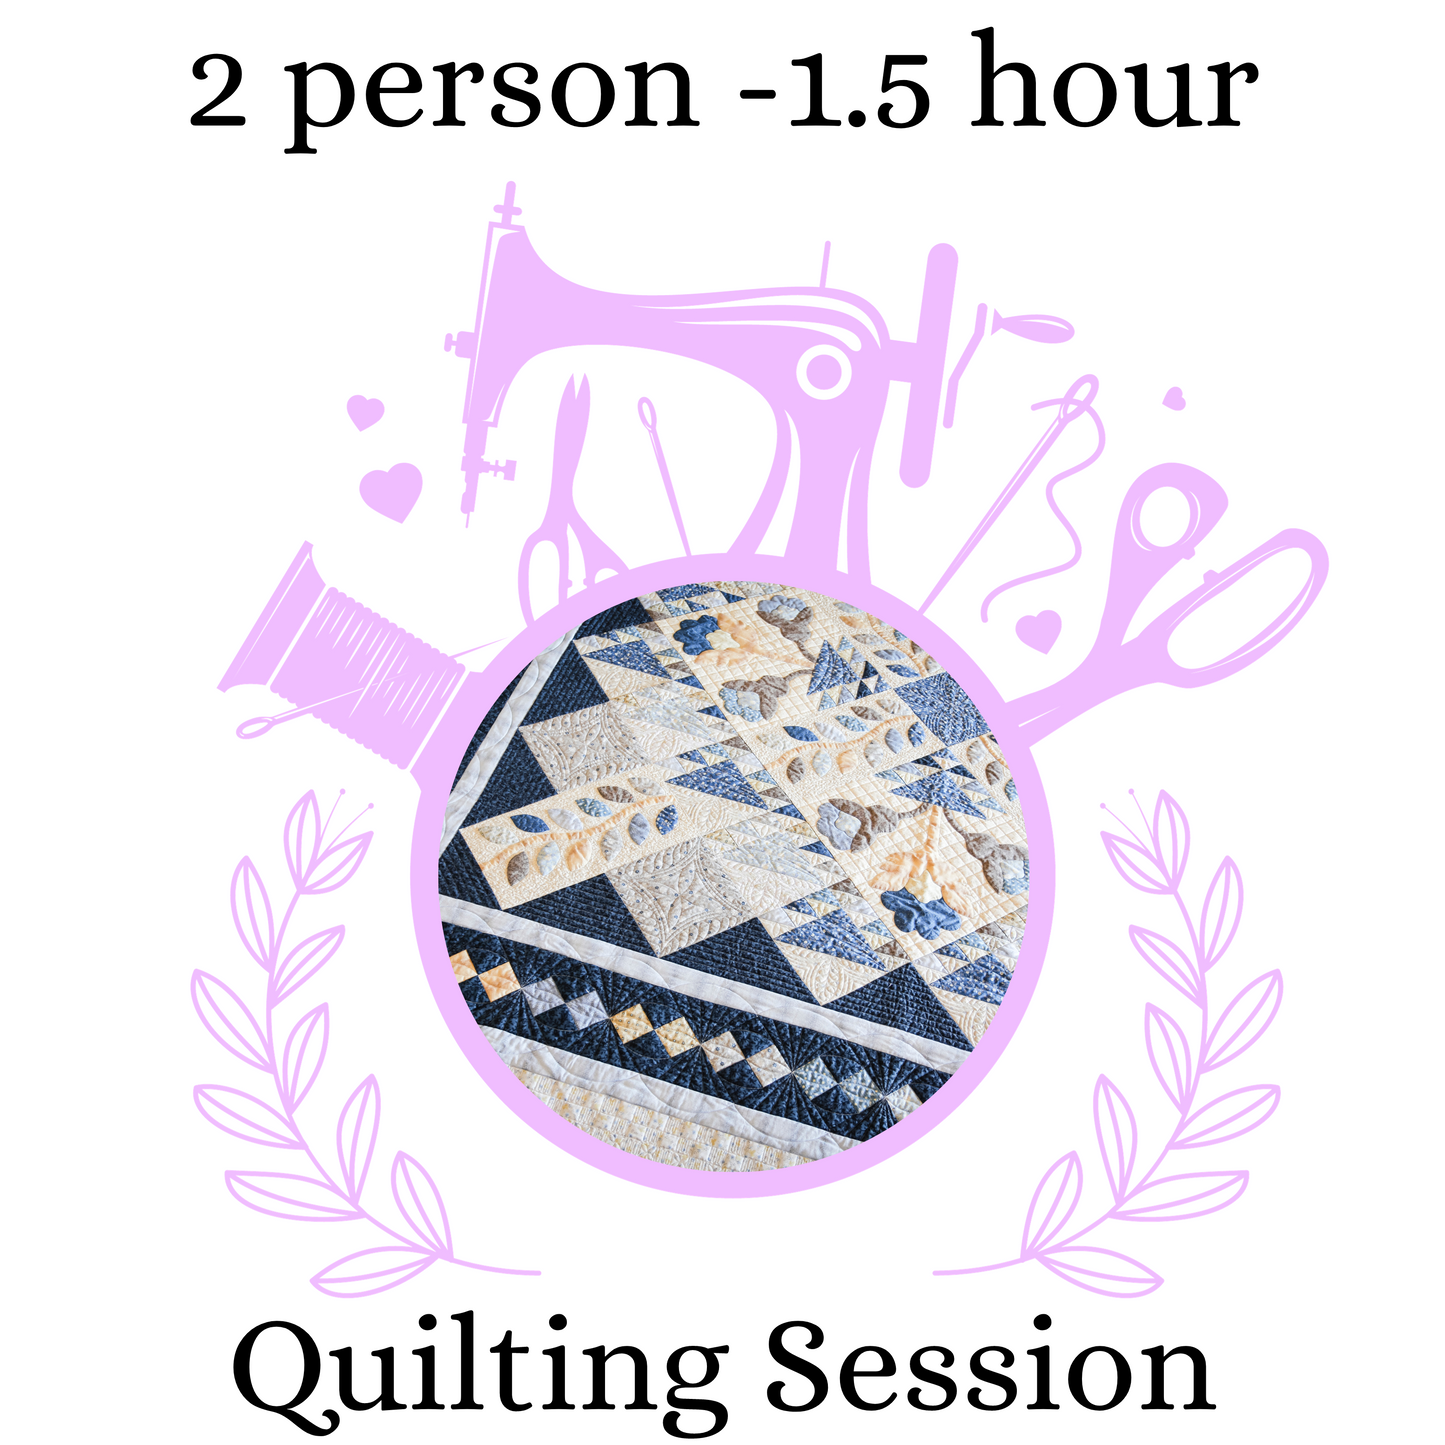 Quilting Class - 2 person for 1.5 hours